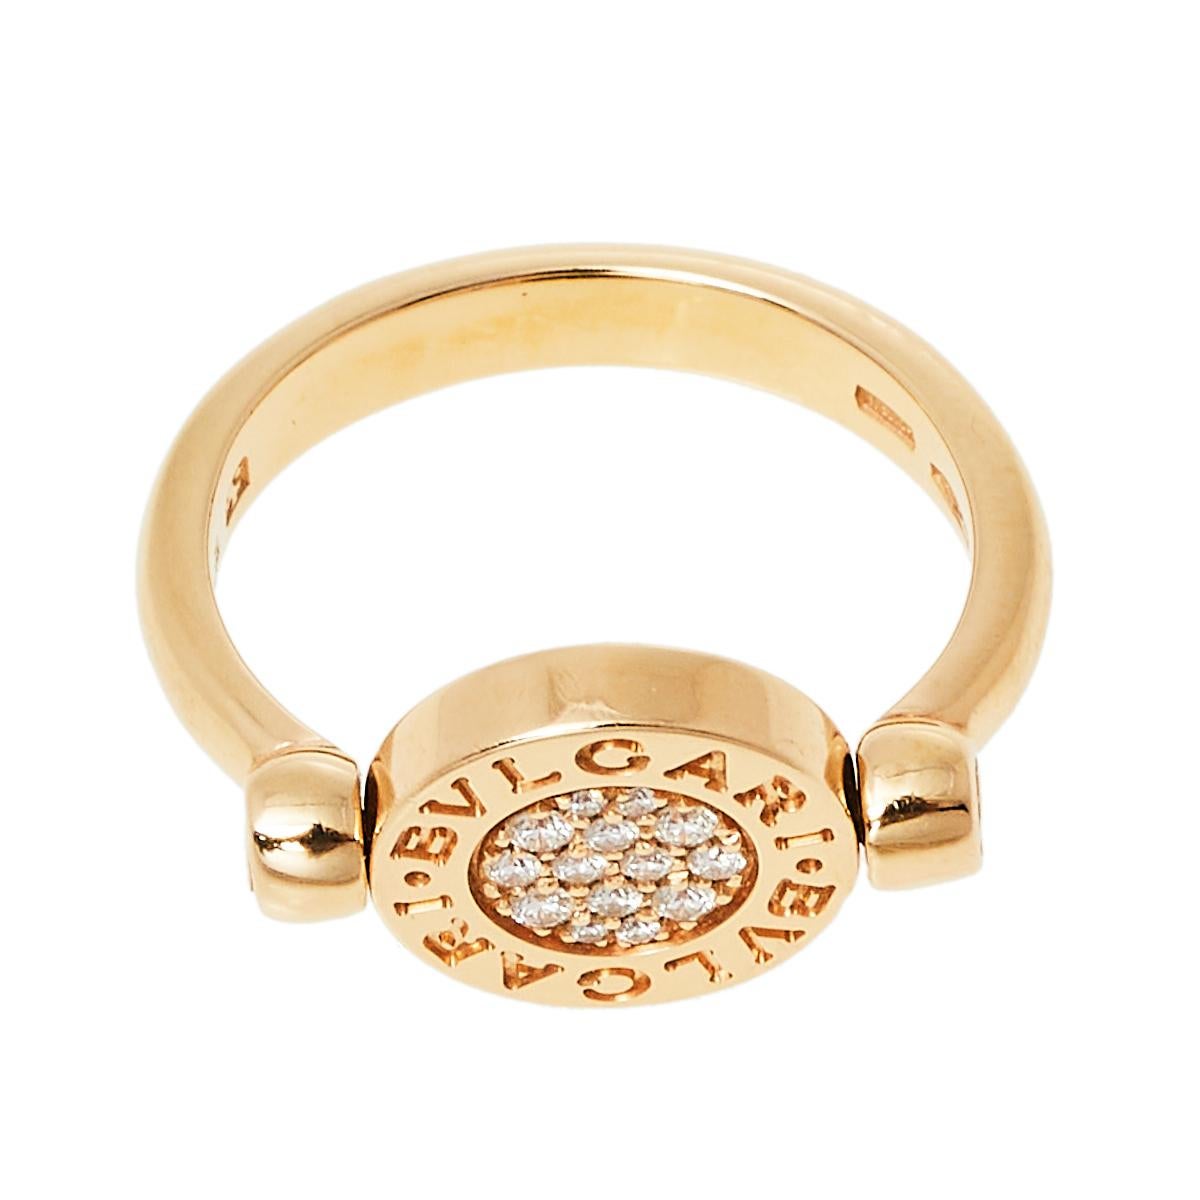 The Bvlgari Bvlgari logo of the brand—a characteristic feature of the Bvlgari designs—was inspired by the inscriptions on the ancient coins. With history engraved on the very face, this beautiful ring delivers a harmonic balance of ethereal 18k gold